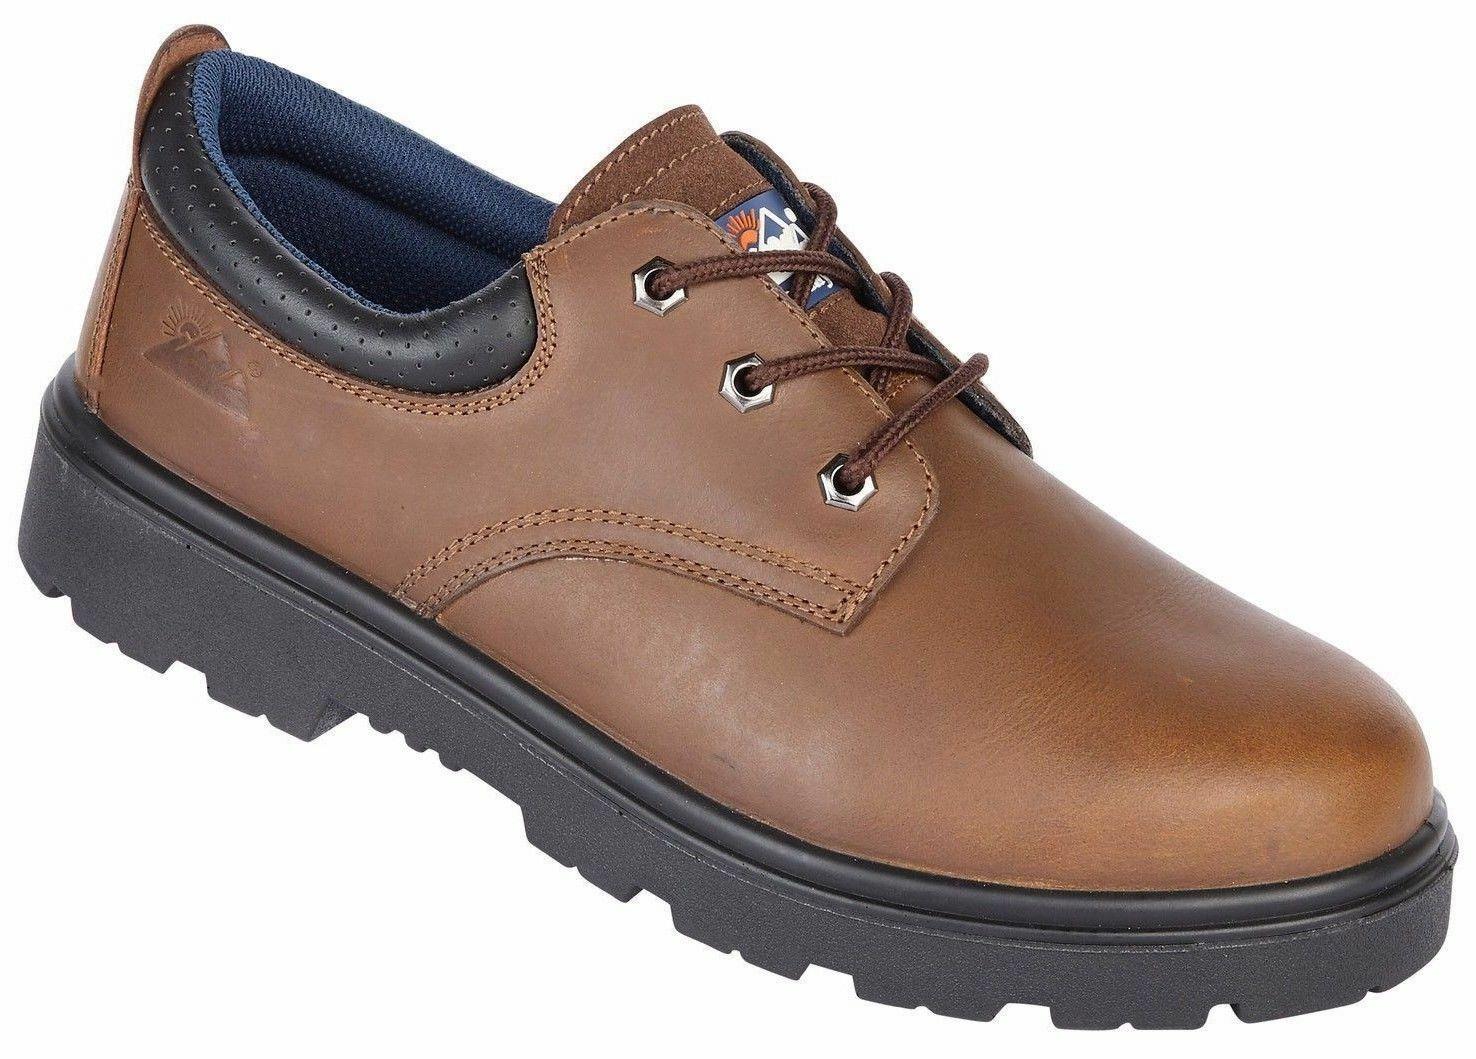 HIMALAYAN 1411 S3 brown leather padded safety shoe with midsole